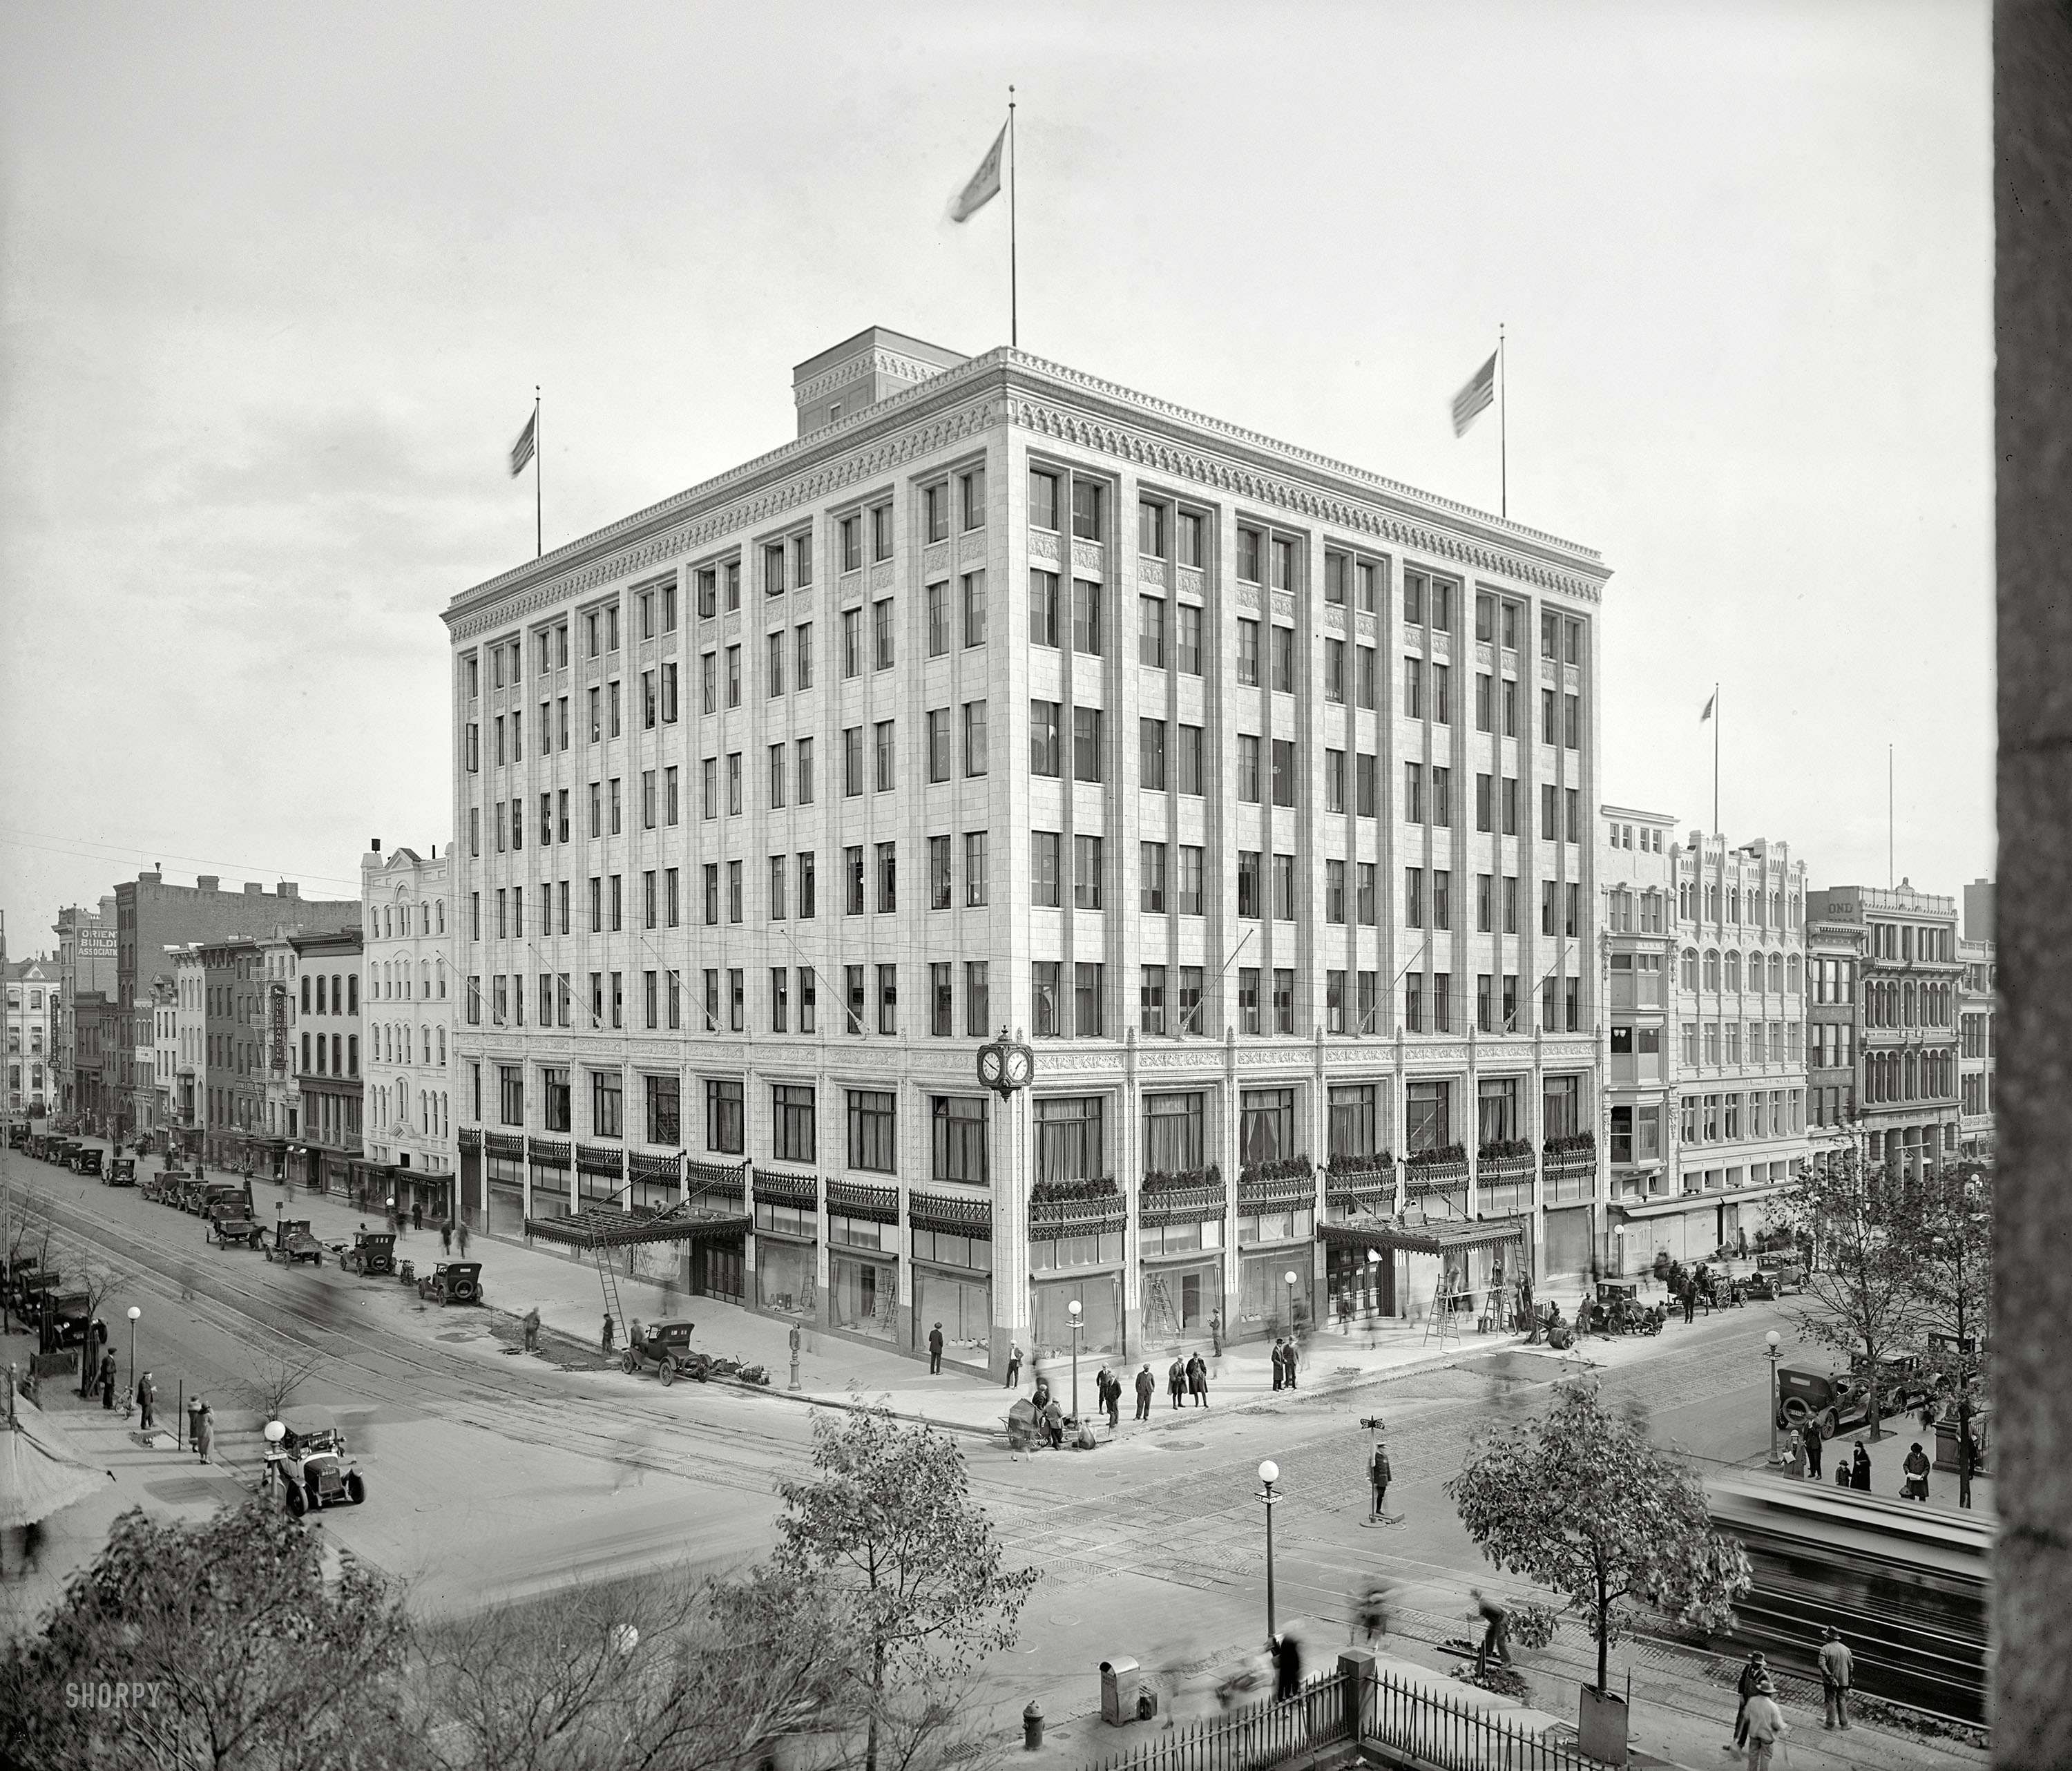 Washington, D.C., circa 1925. "New Hecht store, 7th and F Streets N.W." Many spectral pedestrians on view here, evidenced by an army of disembodied legs. Added bonus: The STOP/GO traffic cop. National Photo Co. View full size.